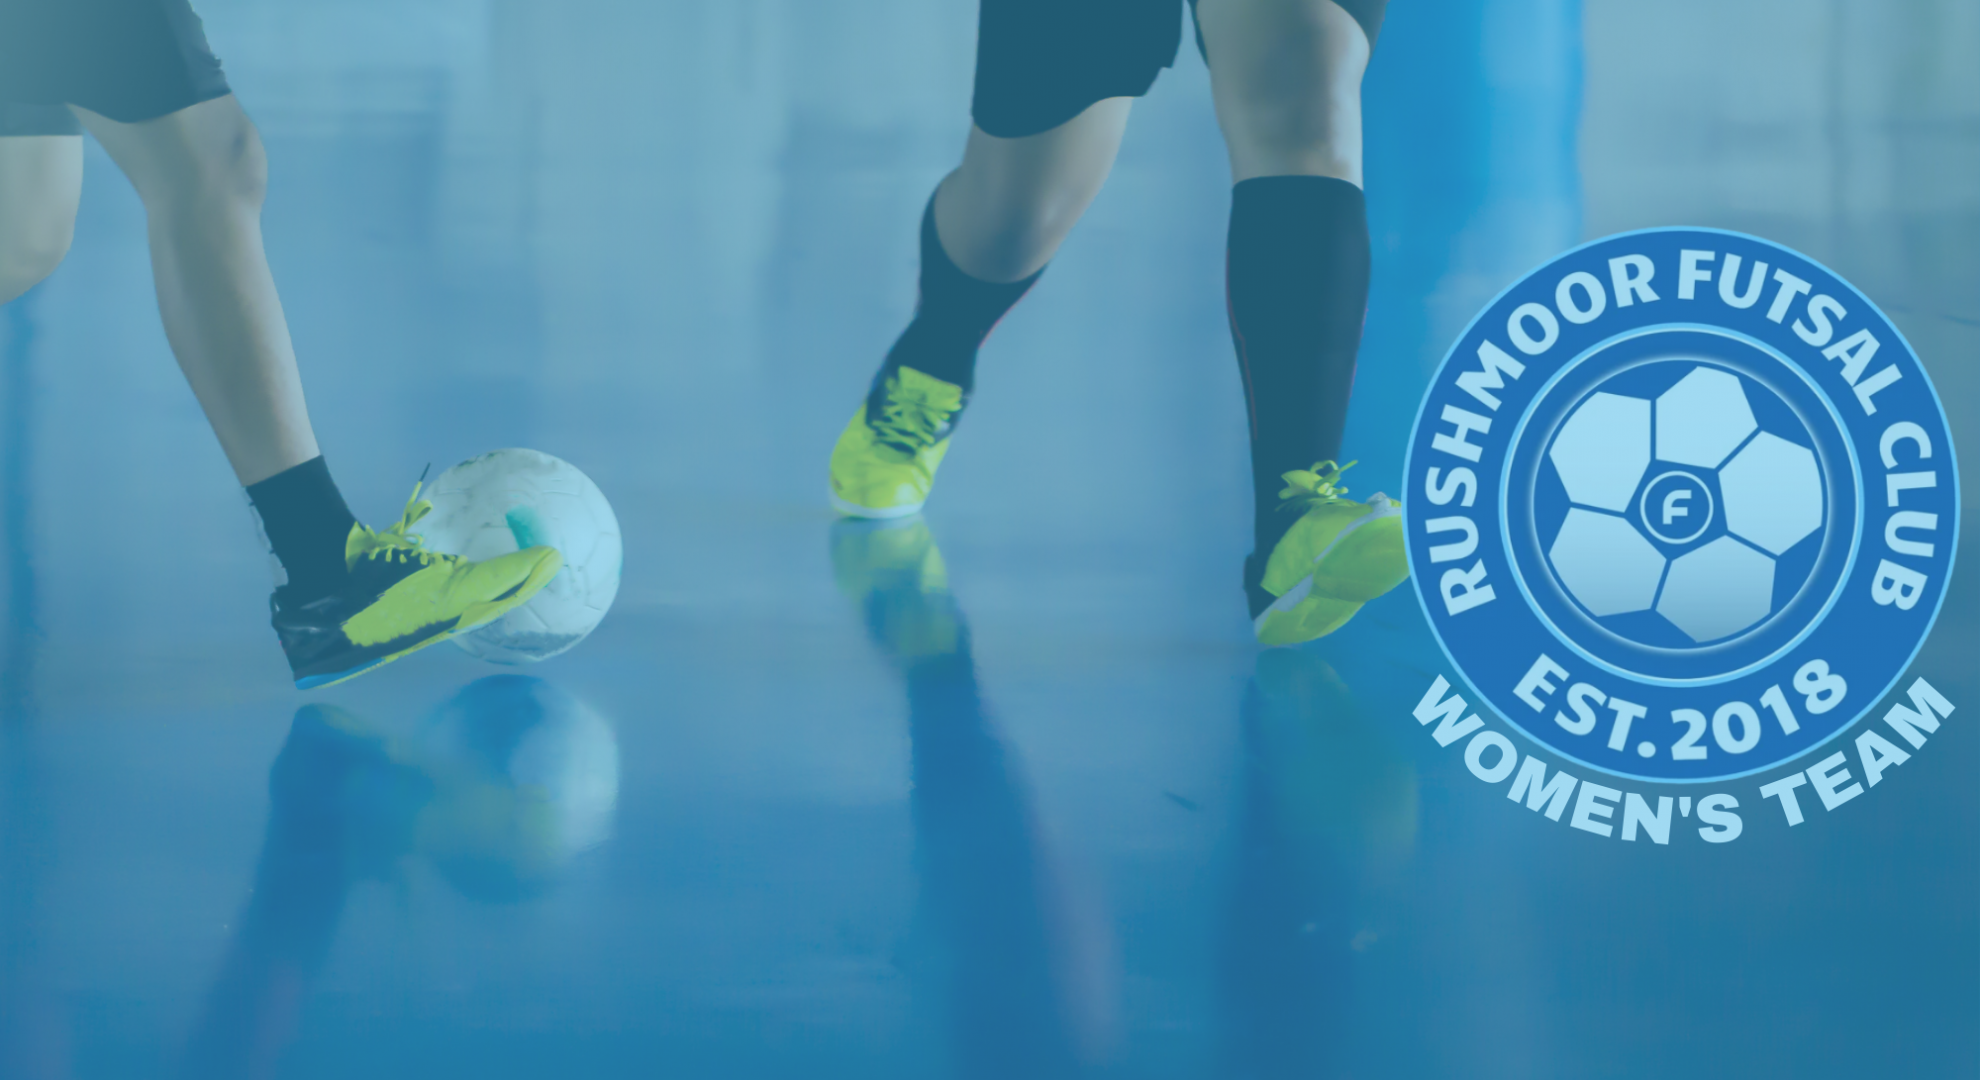 Supporting our community: Rushmoor Women’s Futsal Club header image